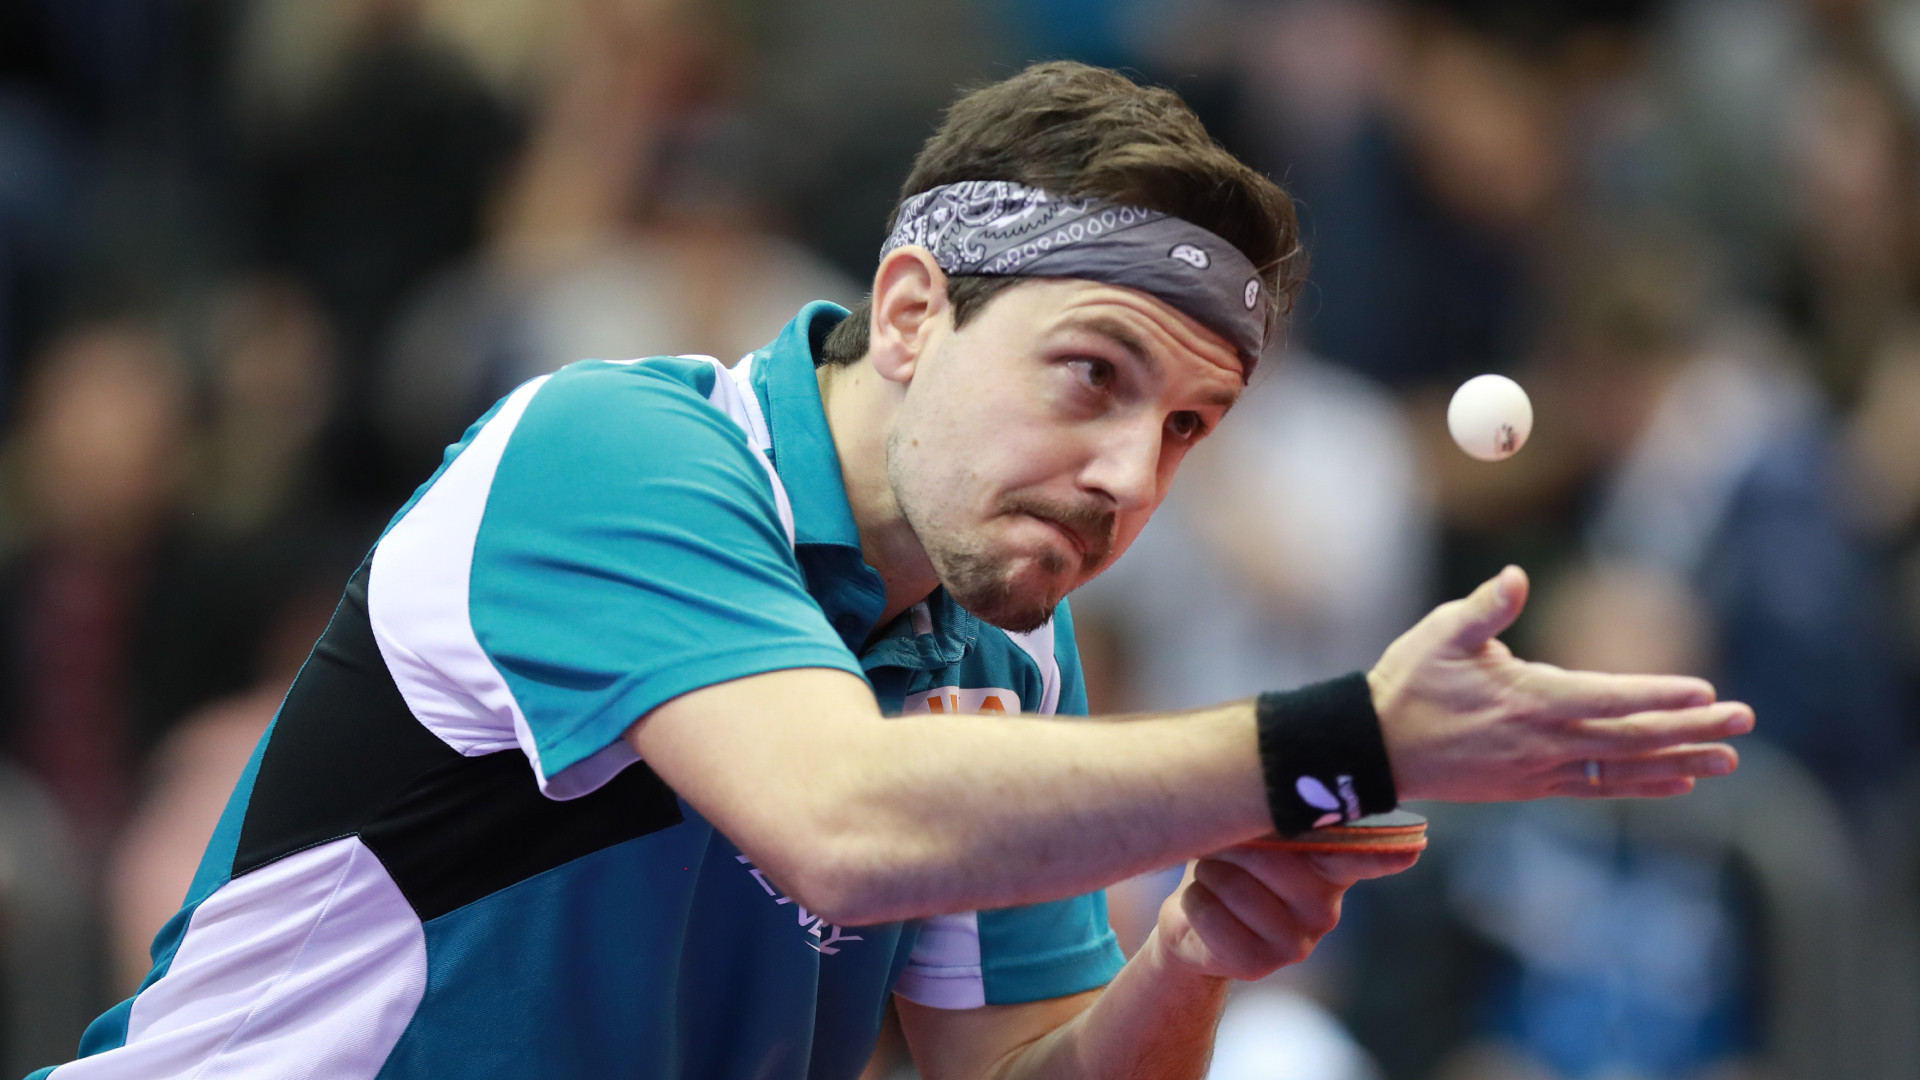 Germany’s Timo Boll came from behind to oust Japan’s Yuya Oshima from the men's singles competition ©ITTF/Rémy Gros